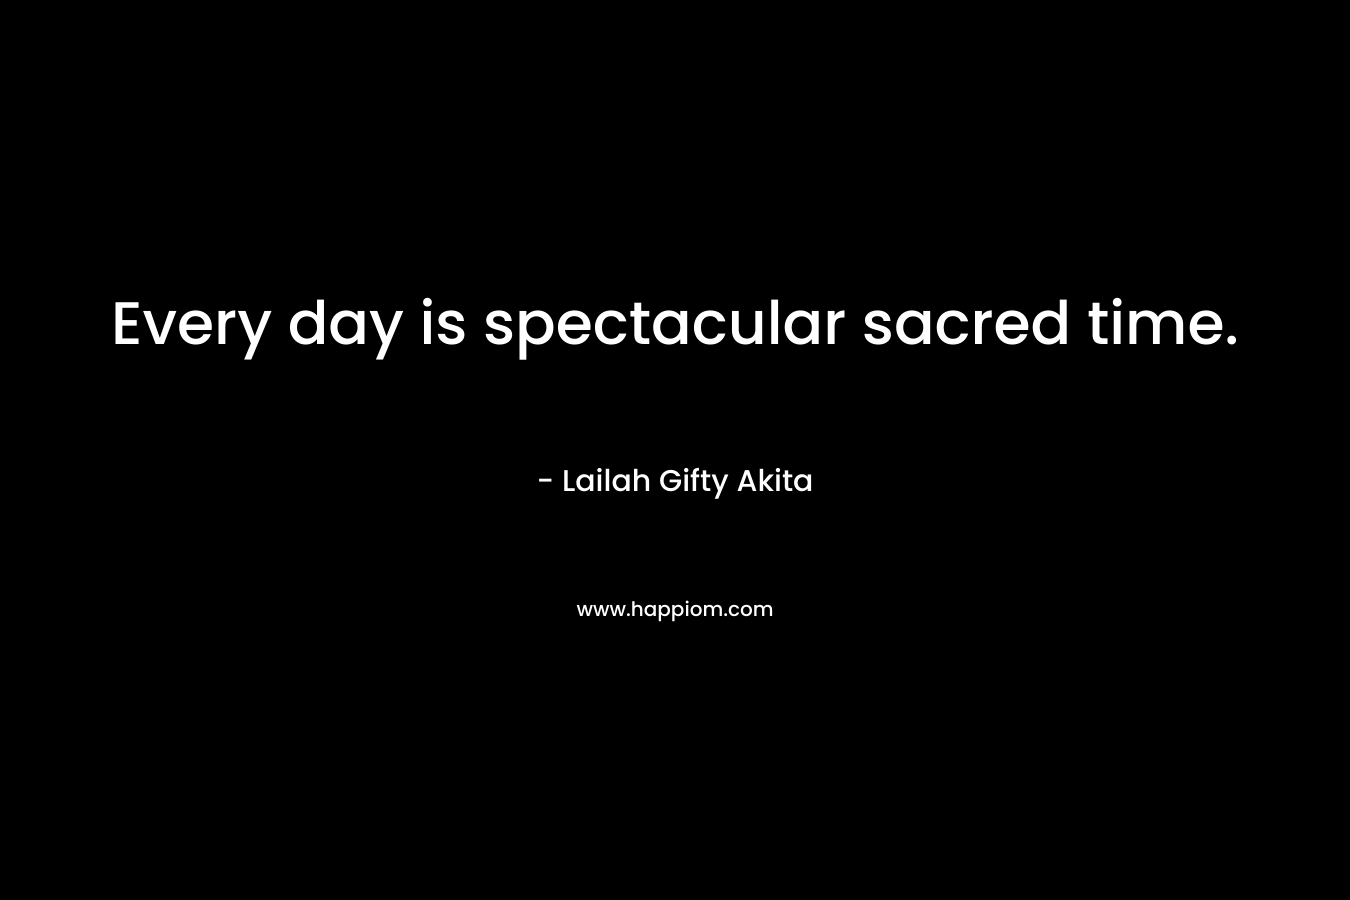 Every day is spectacular sacred time.